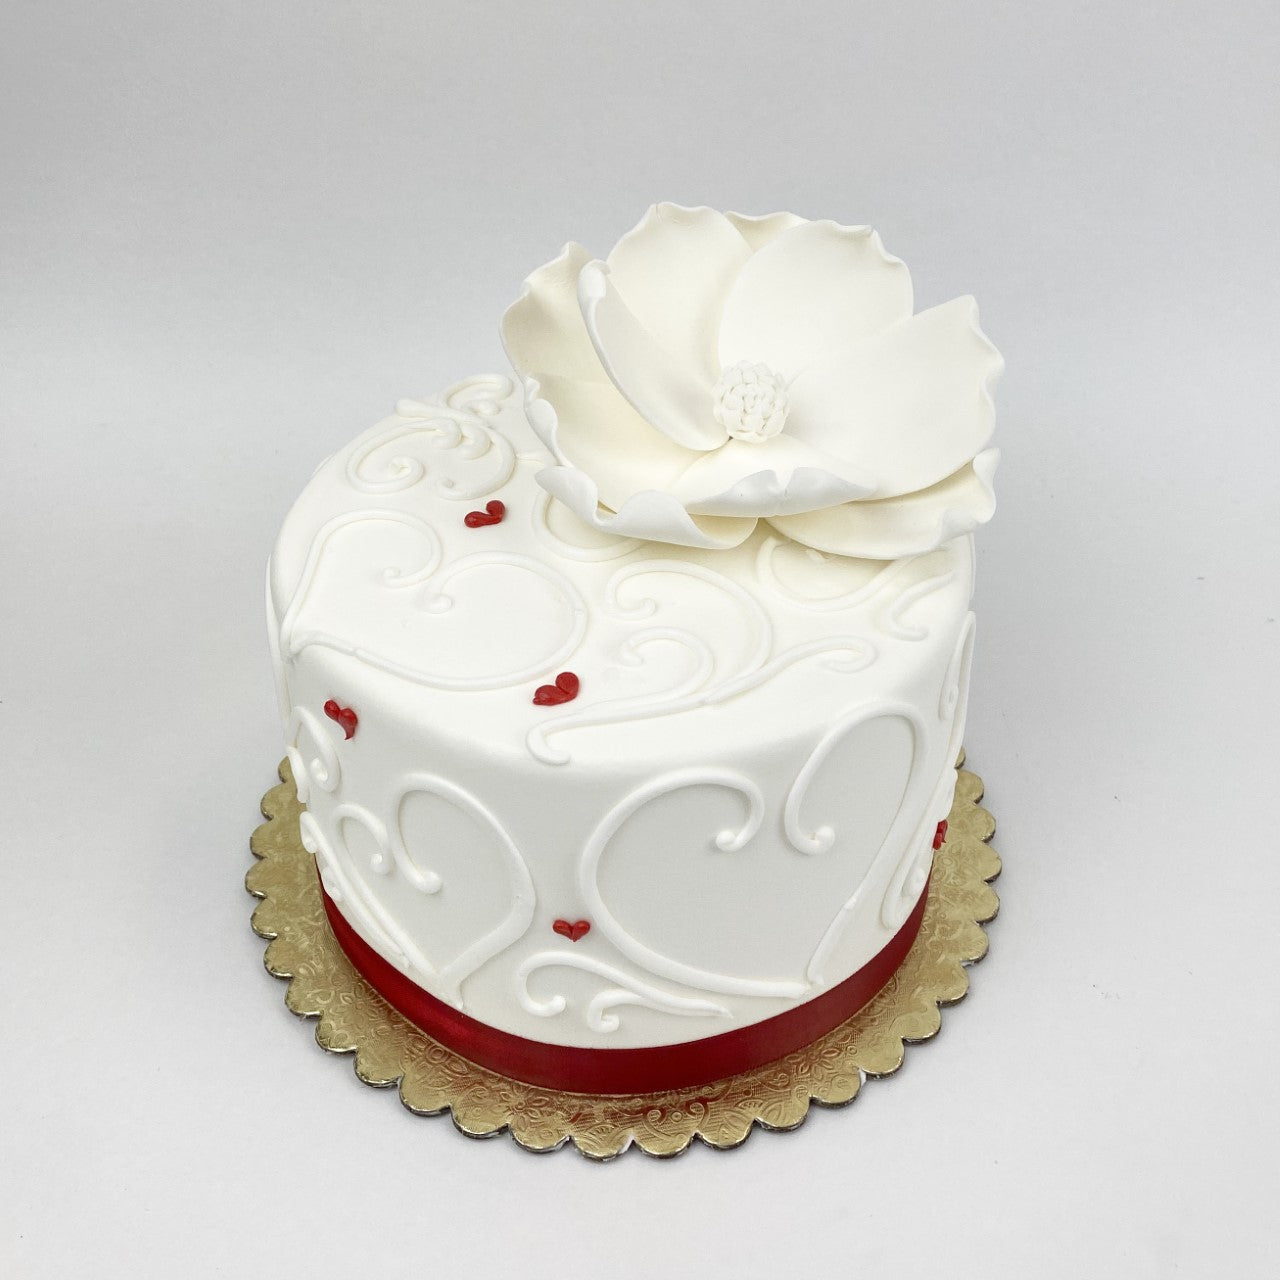 Hearts 'n Lace Cake